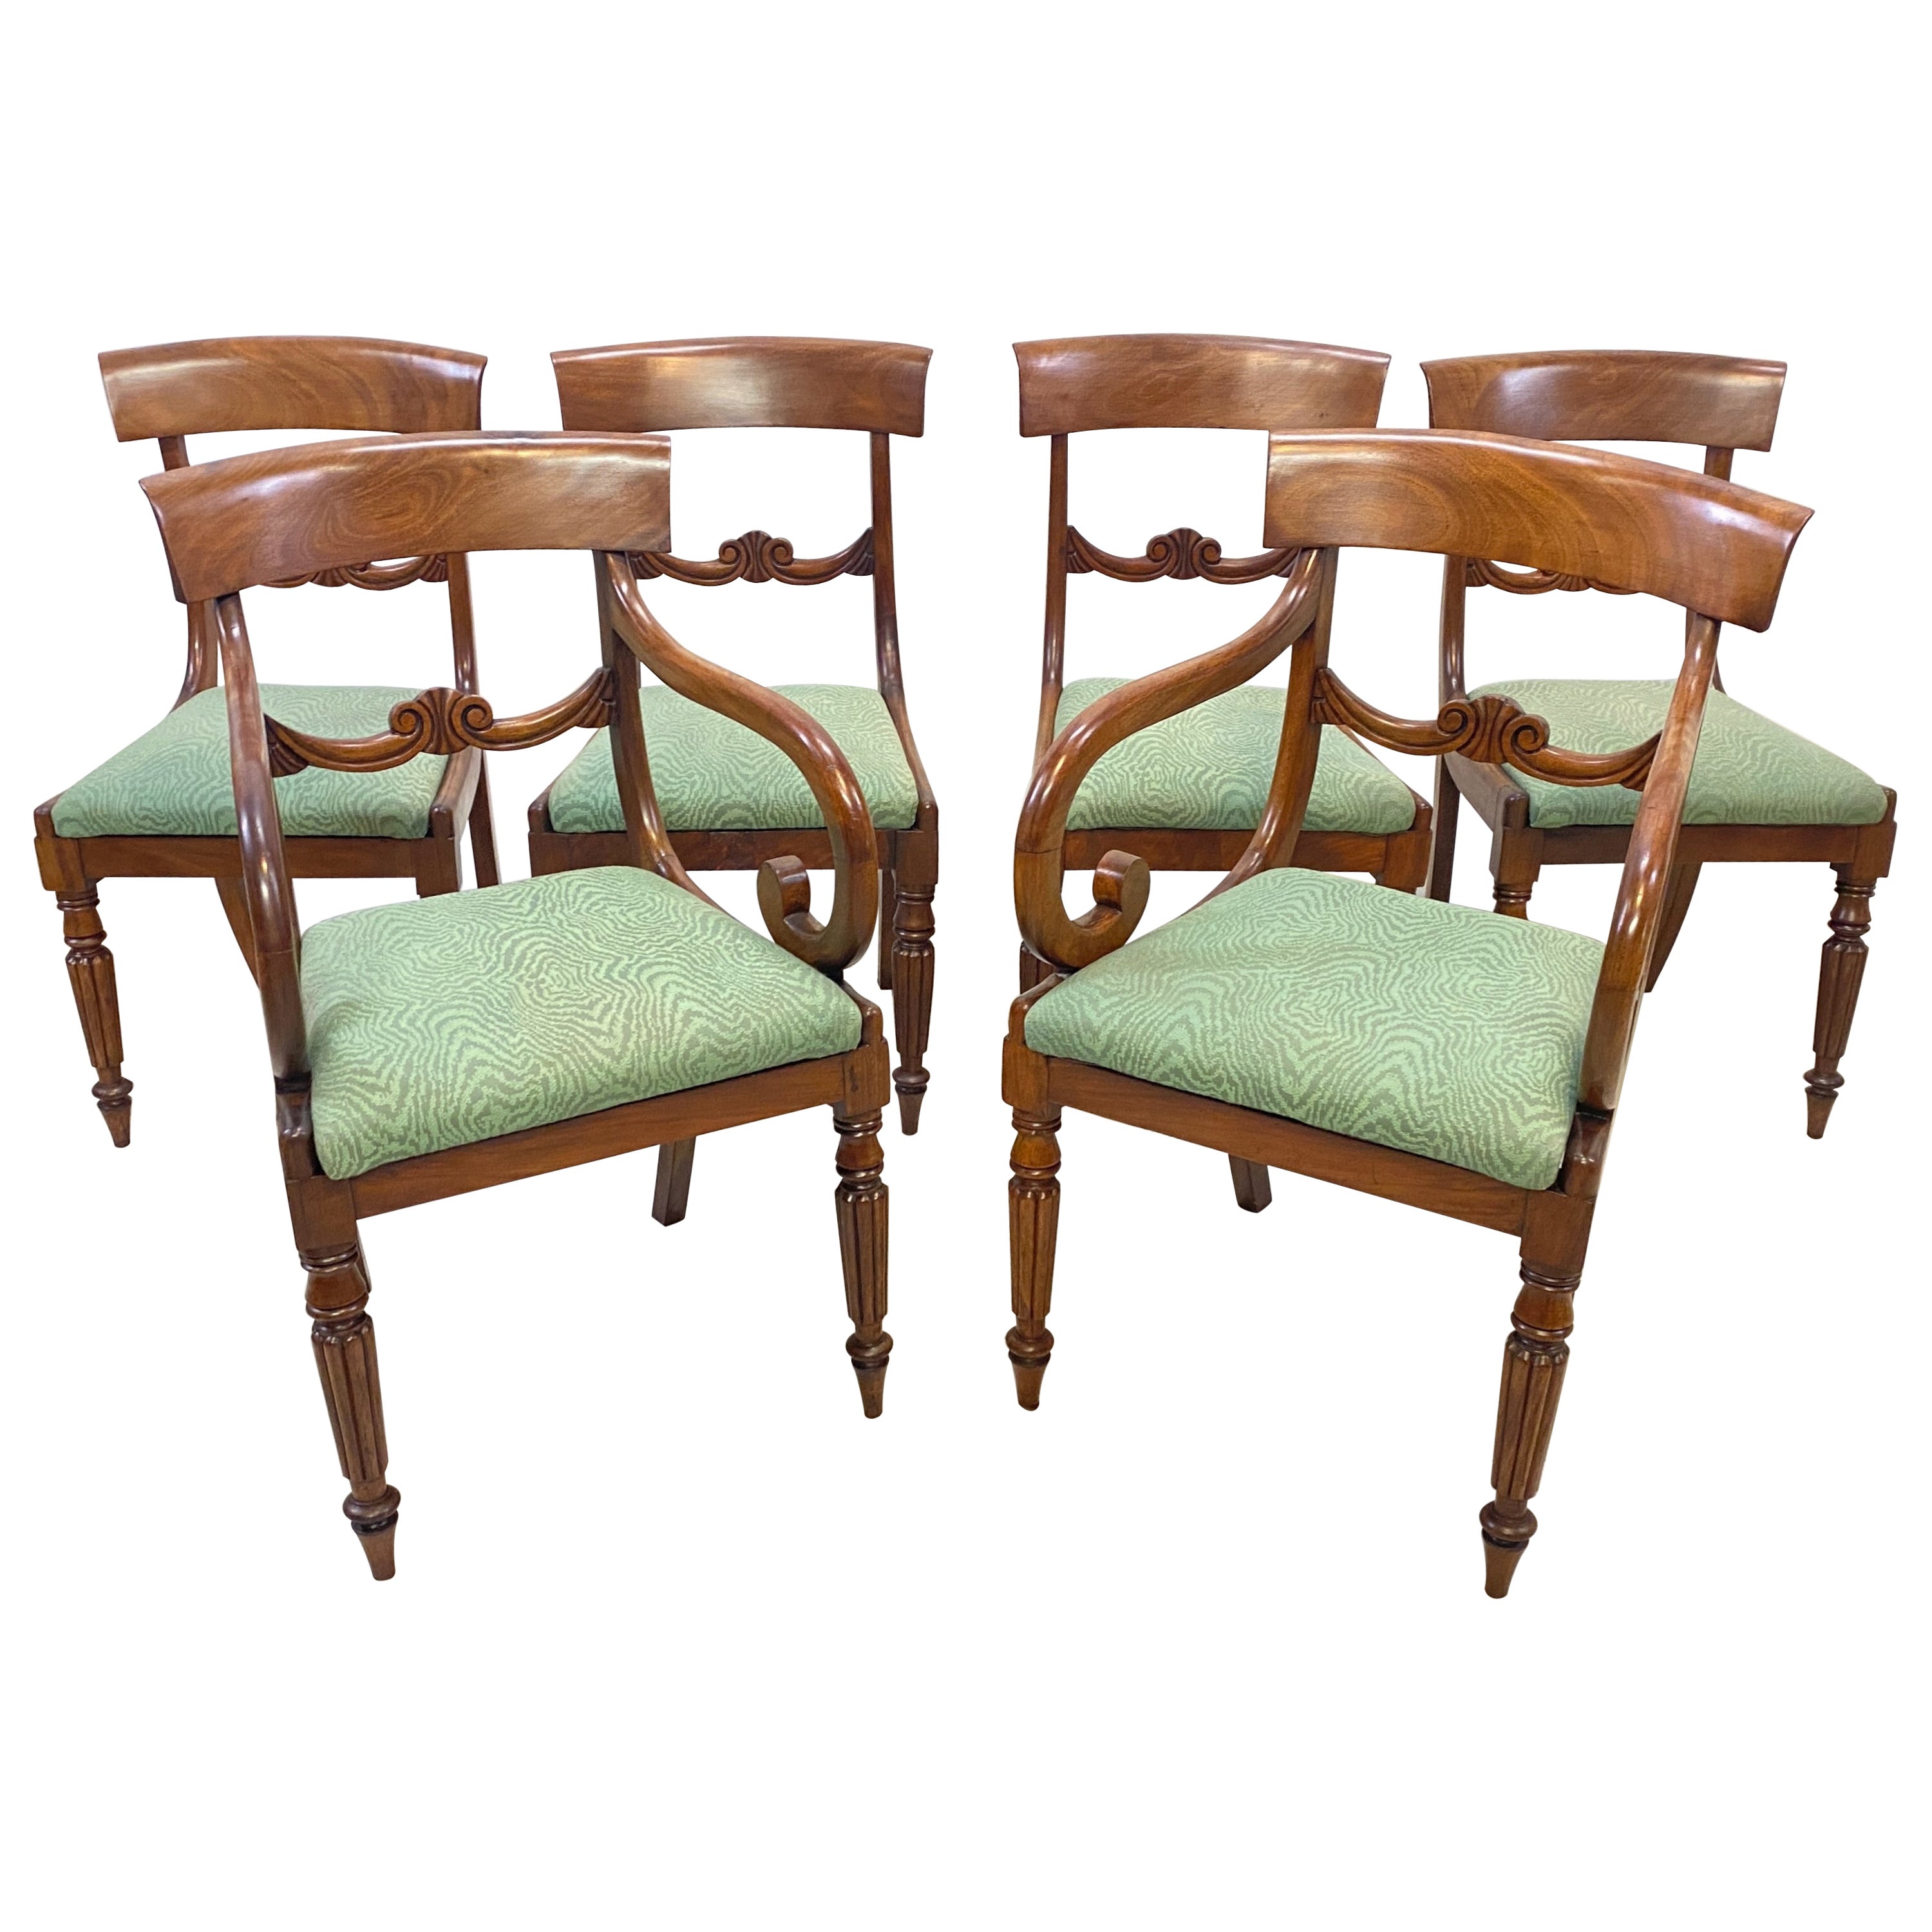 19th Century English George IV Mahogany Regency Dining Chairs, Set of Six For Sale